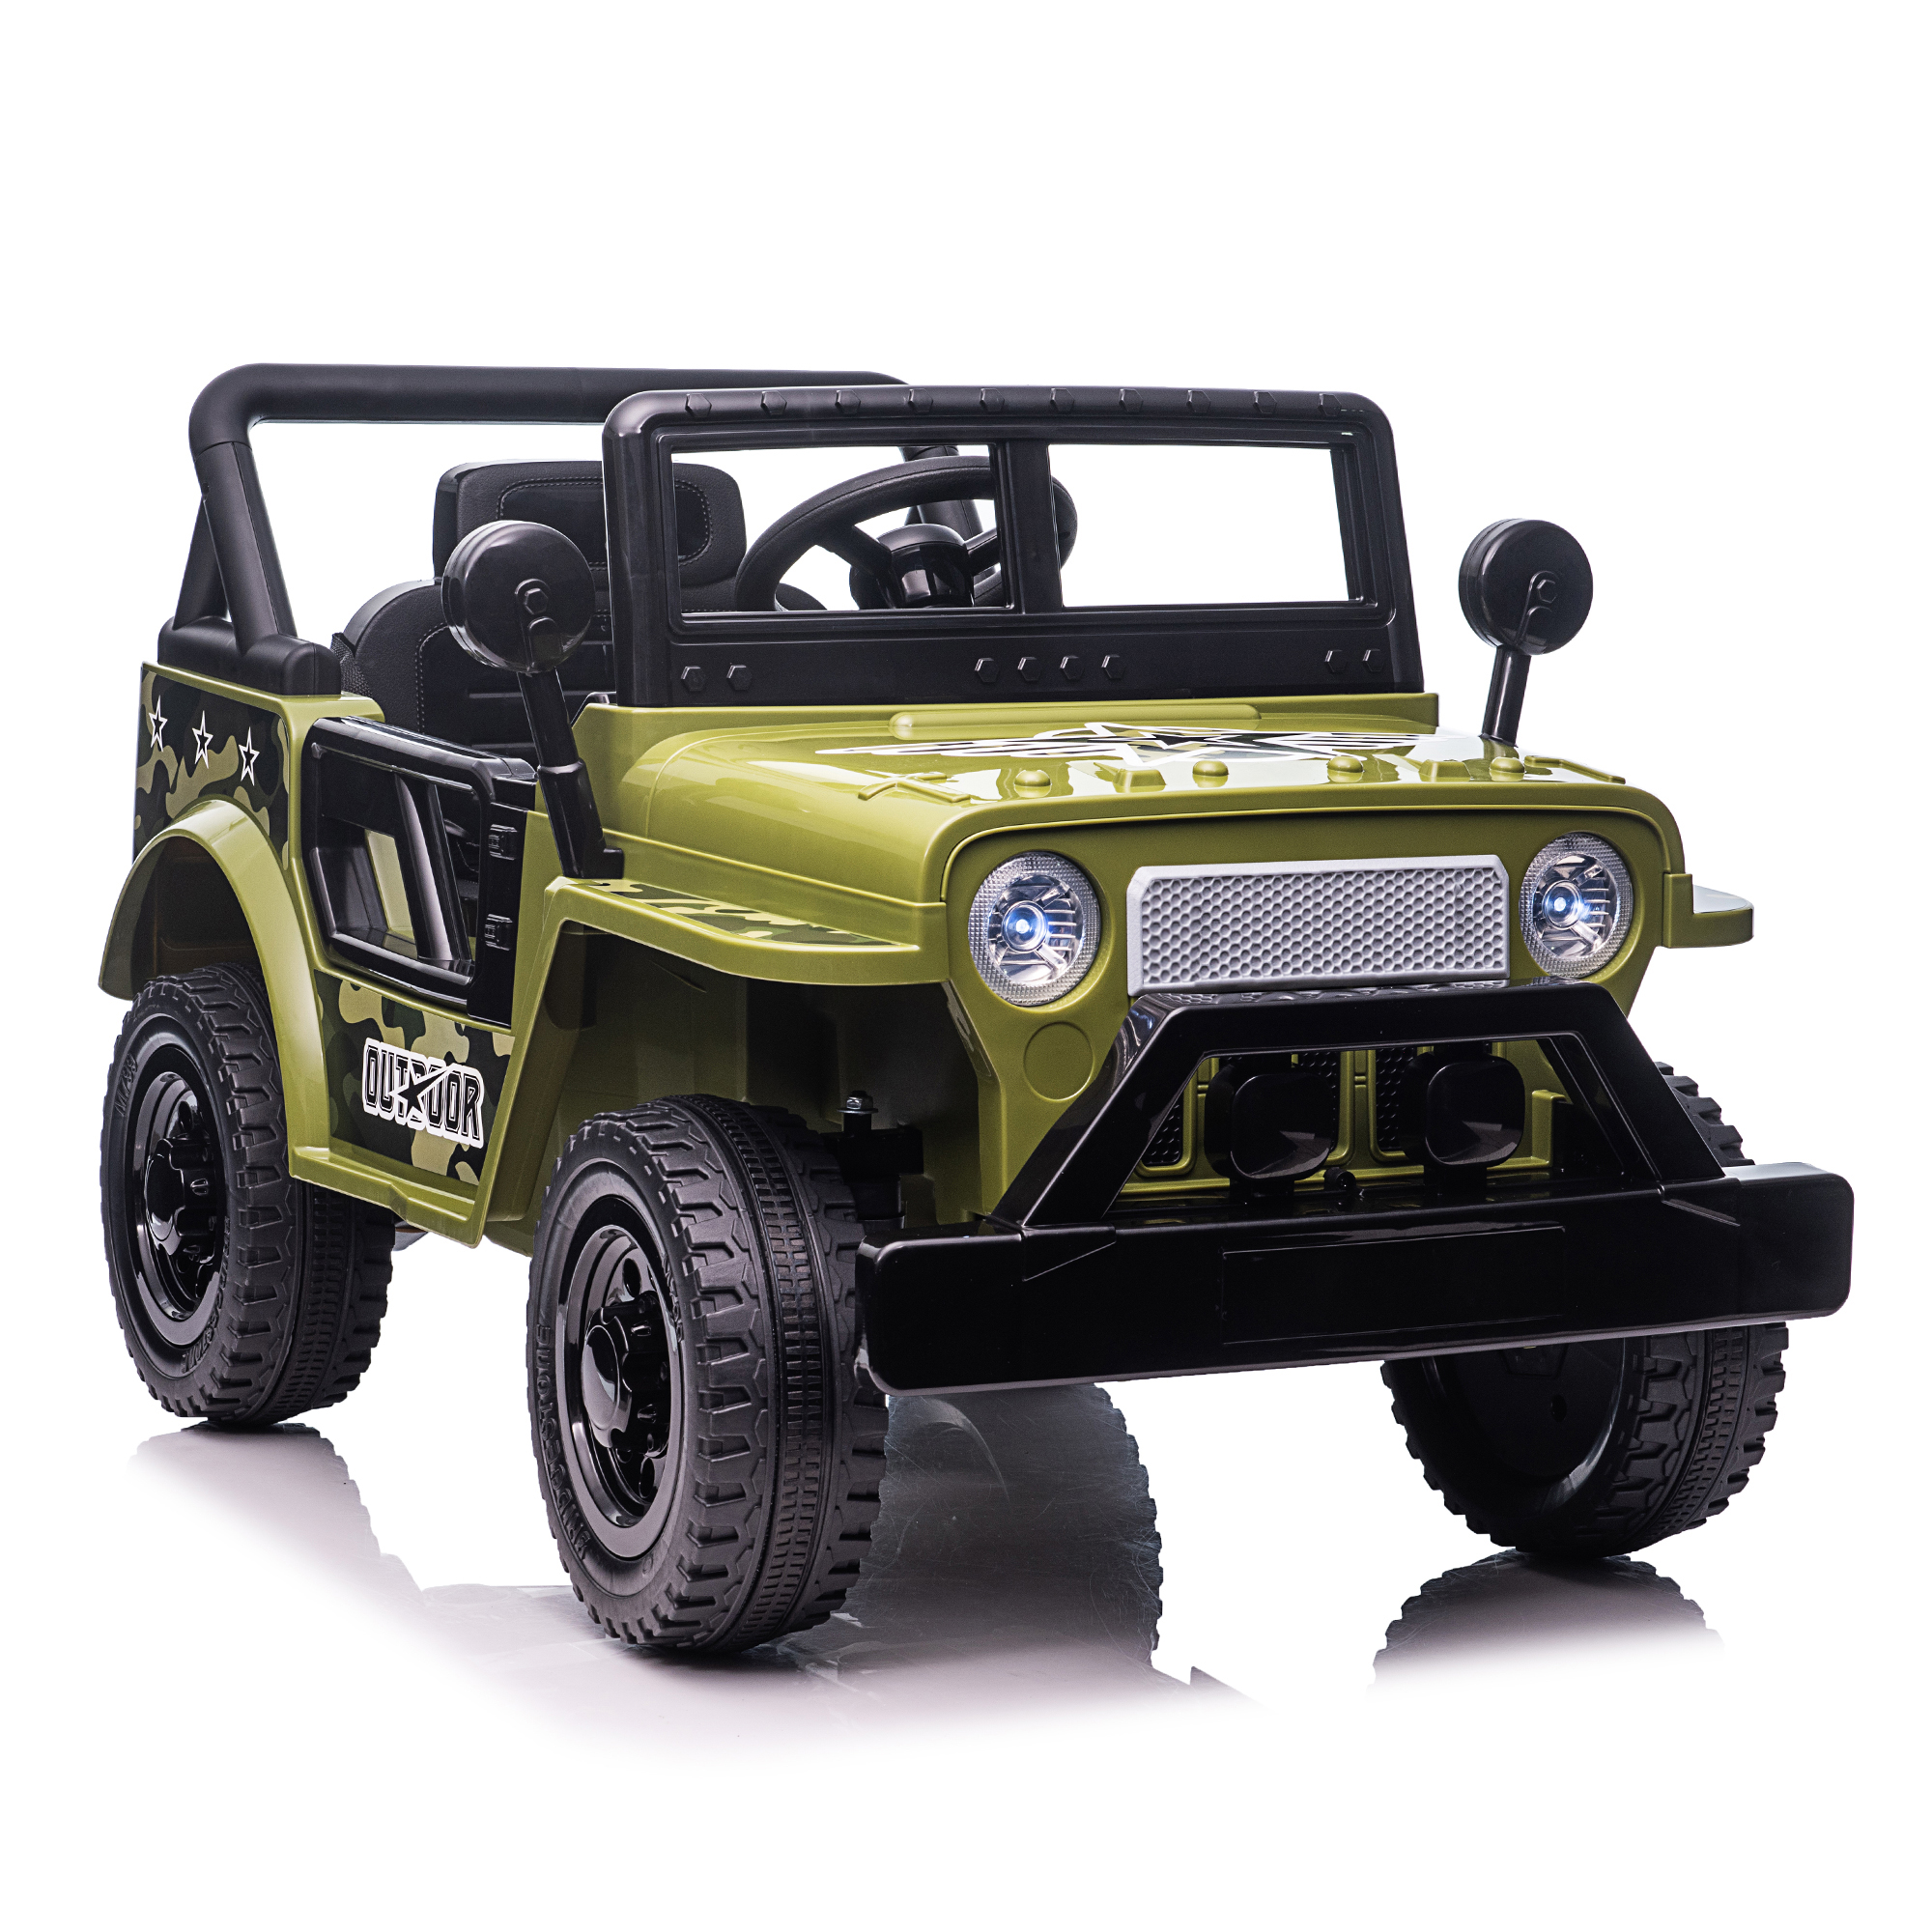 Customized 12V Kids Ride On Truck Car, Power Wheels with LED Lights Horn Openable Doors, Electric Vehicle Toy for 3-6 Ages, Green-CASAINC